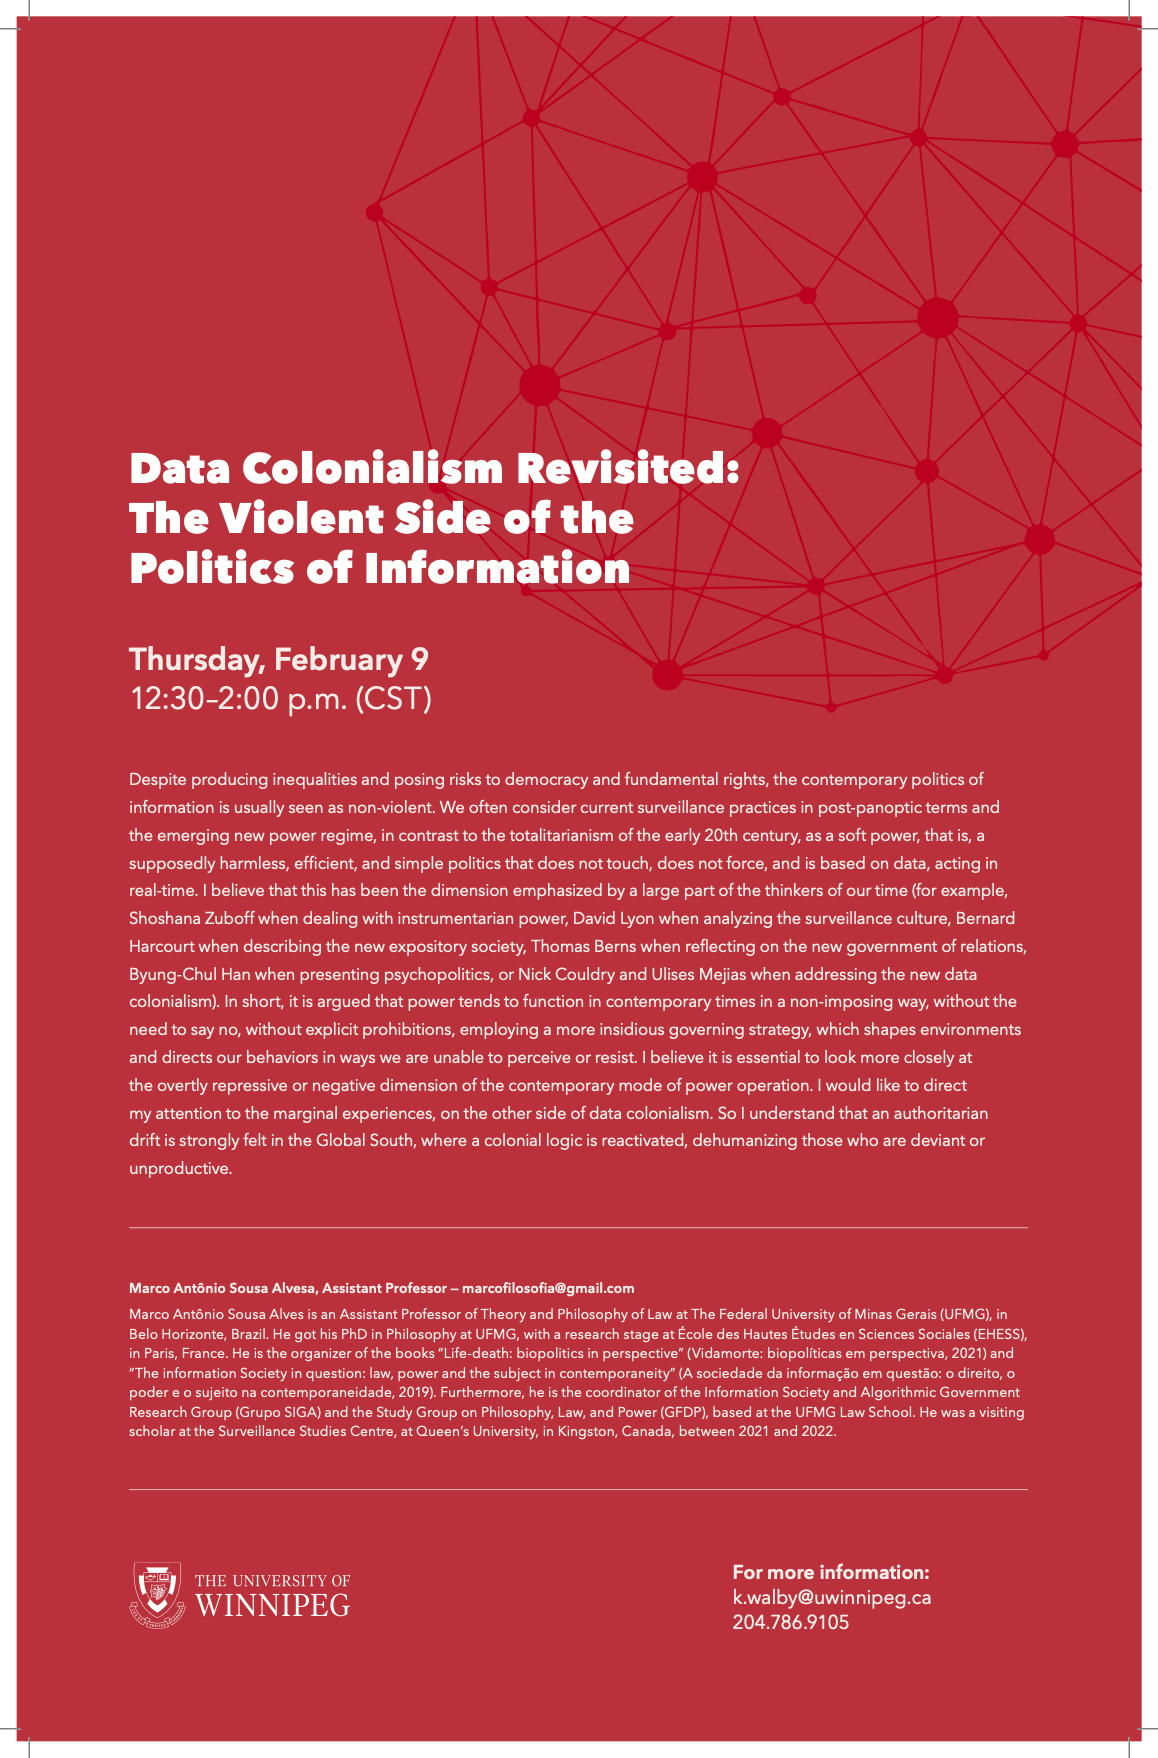 Data Colonialism Revisited: The Violent Side of the Politics of Information @ Virtual Event